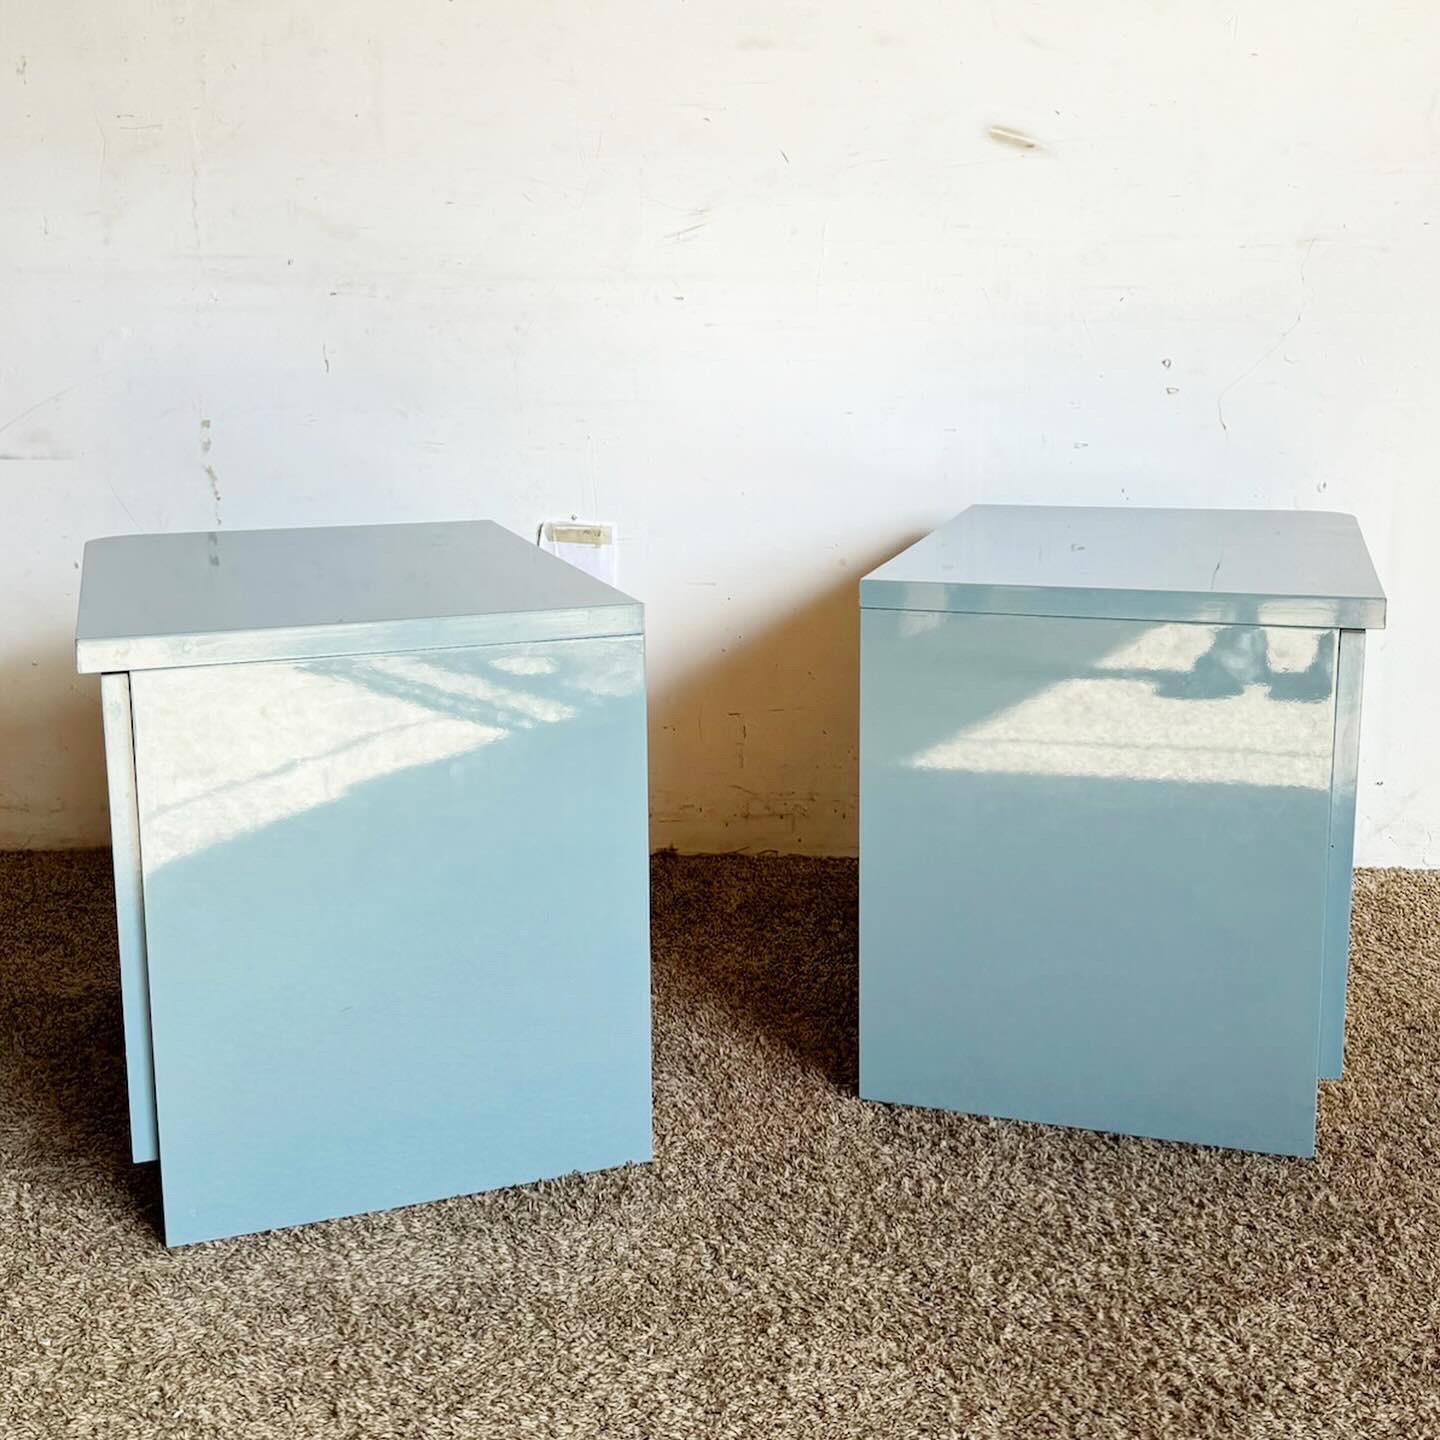 Wood Italian Postmodern Baby Blue Lacquered Nightstands With Gold Accents – a Pair For Sale